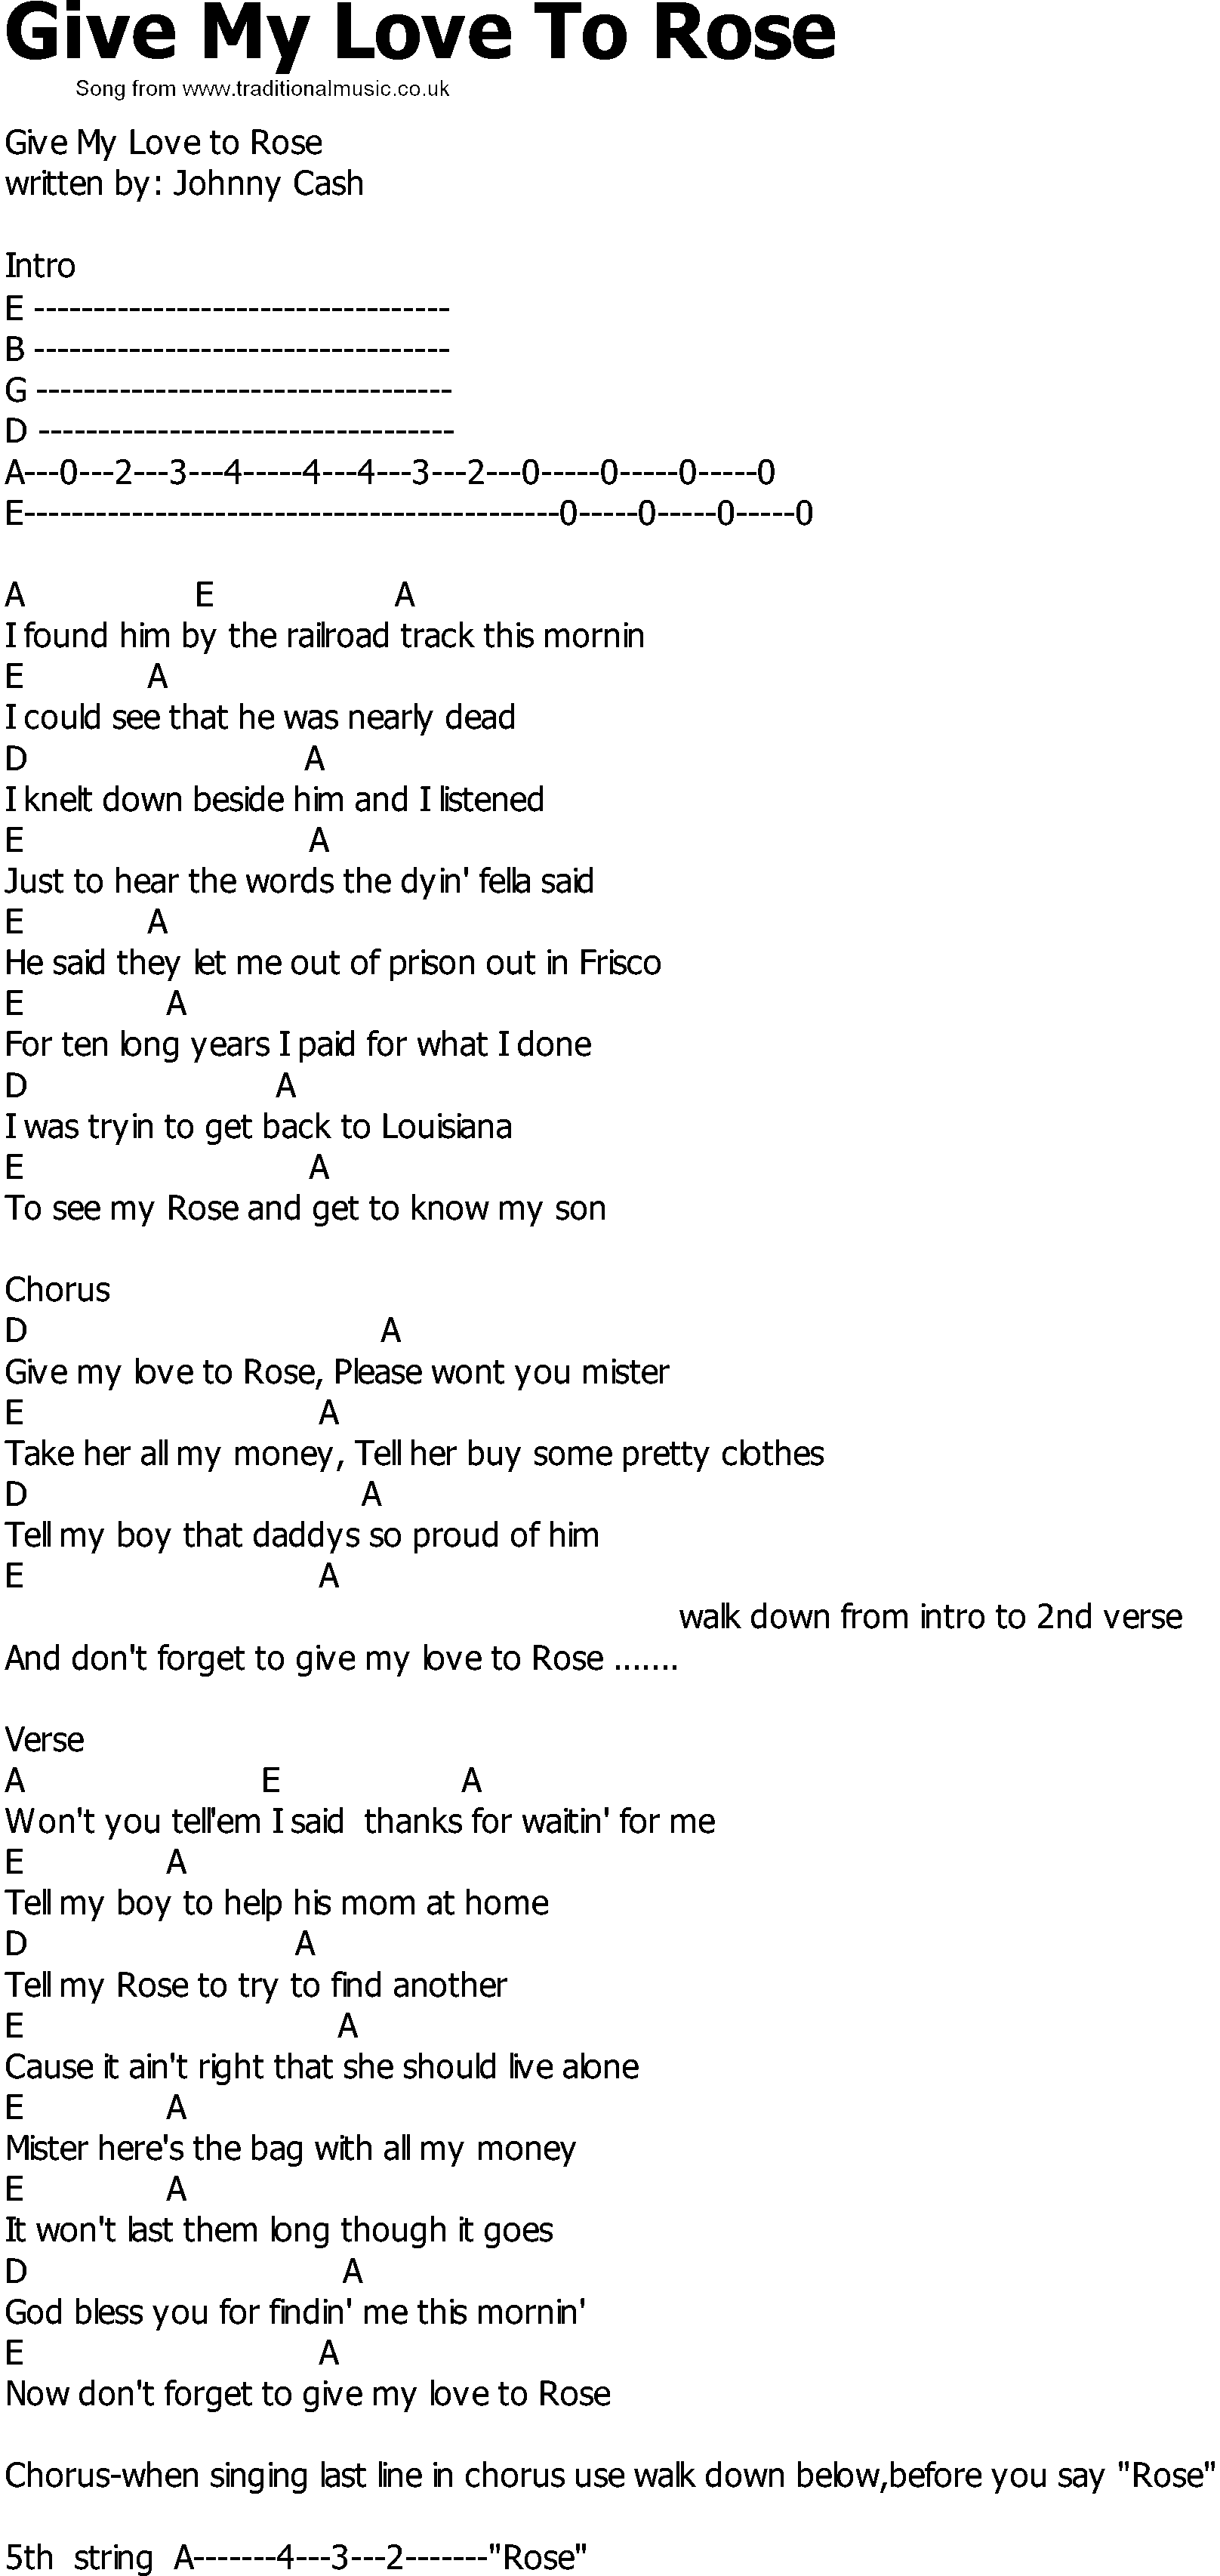 Old Country song lyrics with chords - Give My Love To Rose